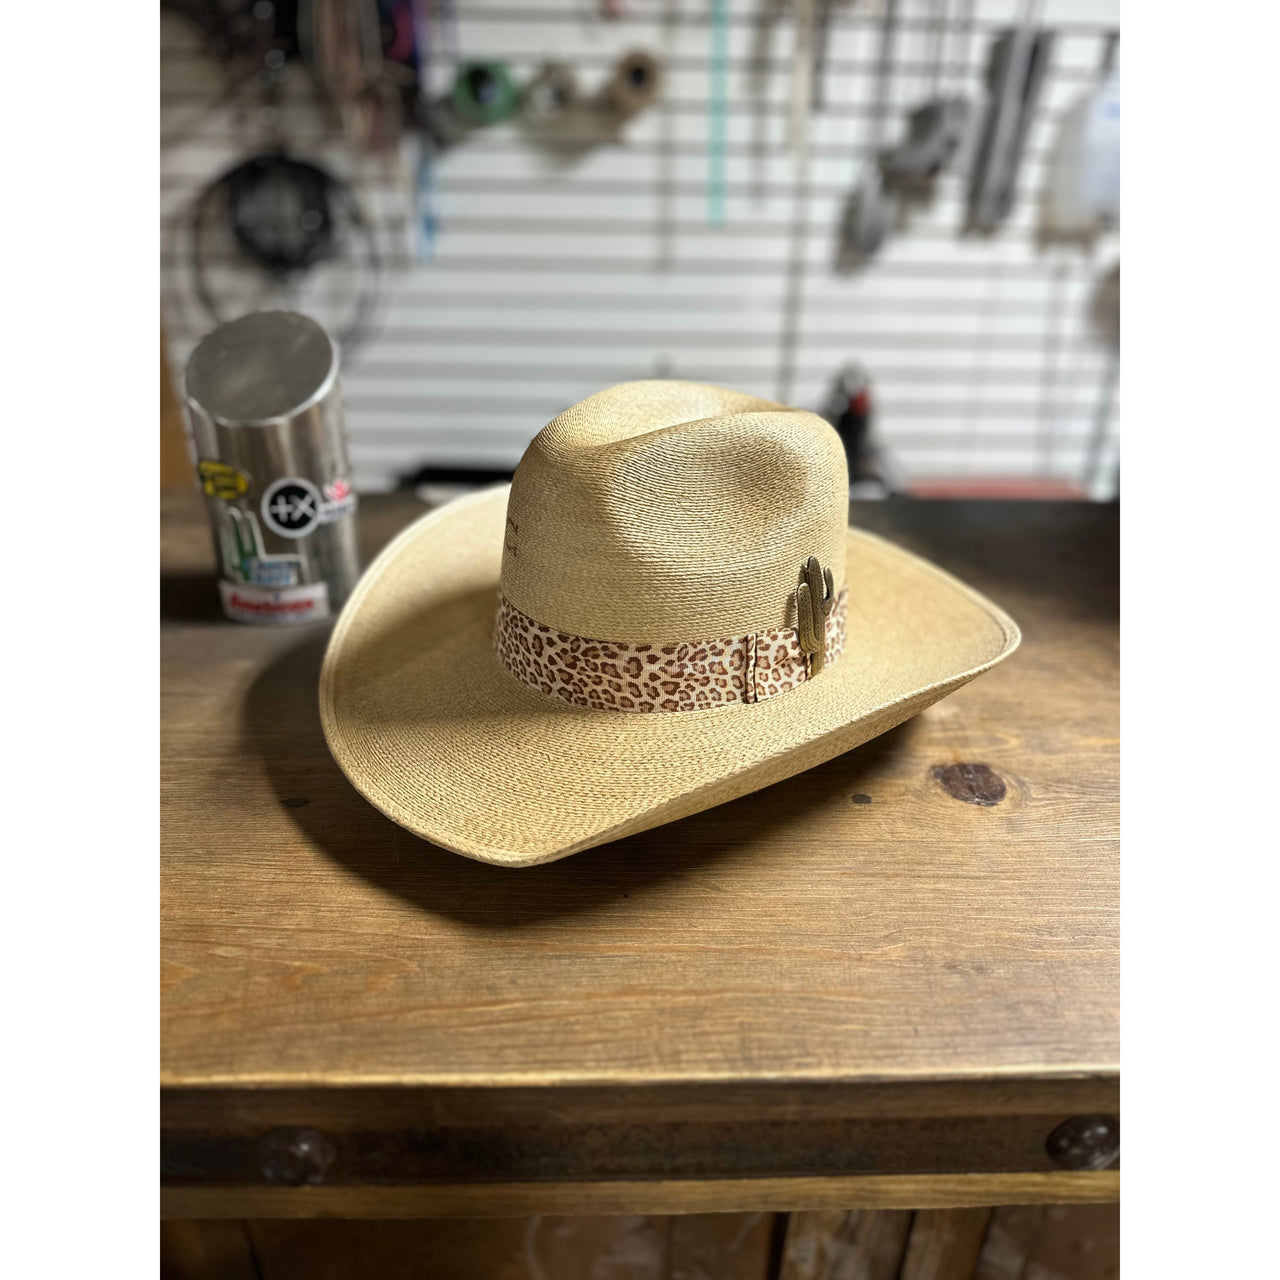 Charlie One Horse Wild Thing Western Hat